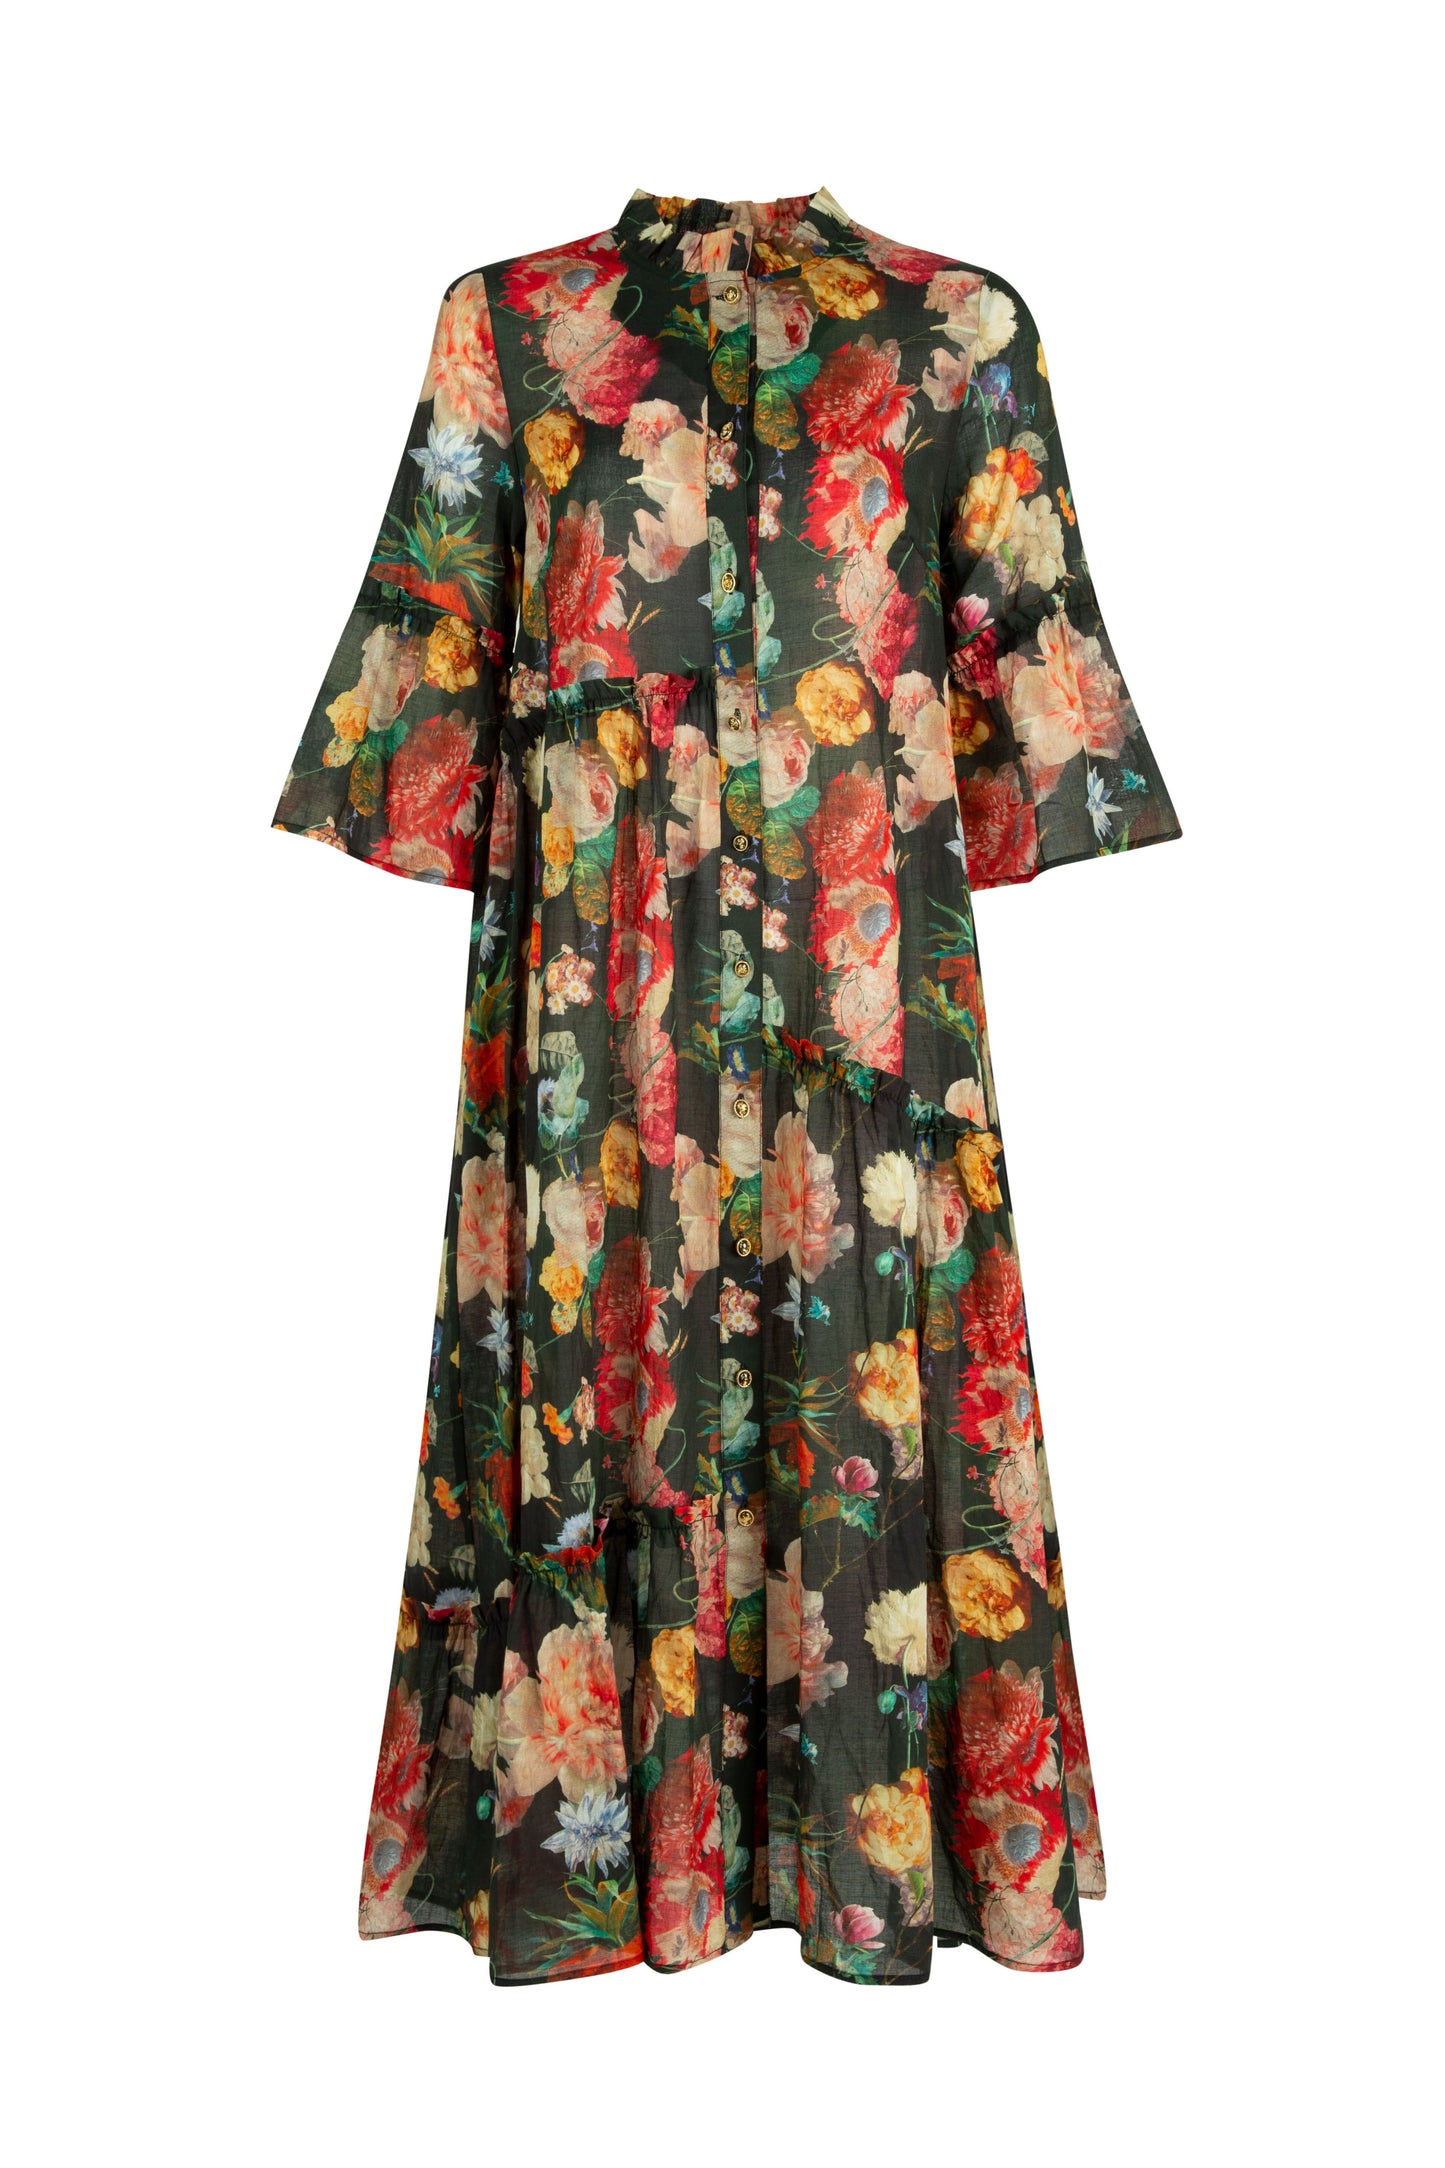 COOP BY YOUR SIDE DRESS - FLORAL - THE VOGUE STORE